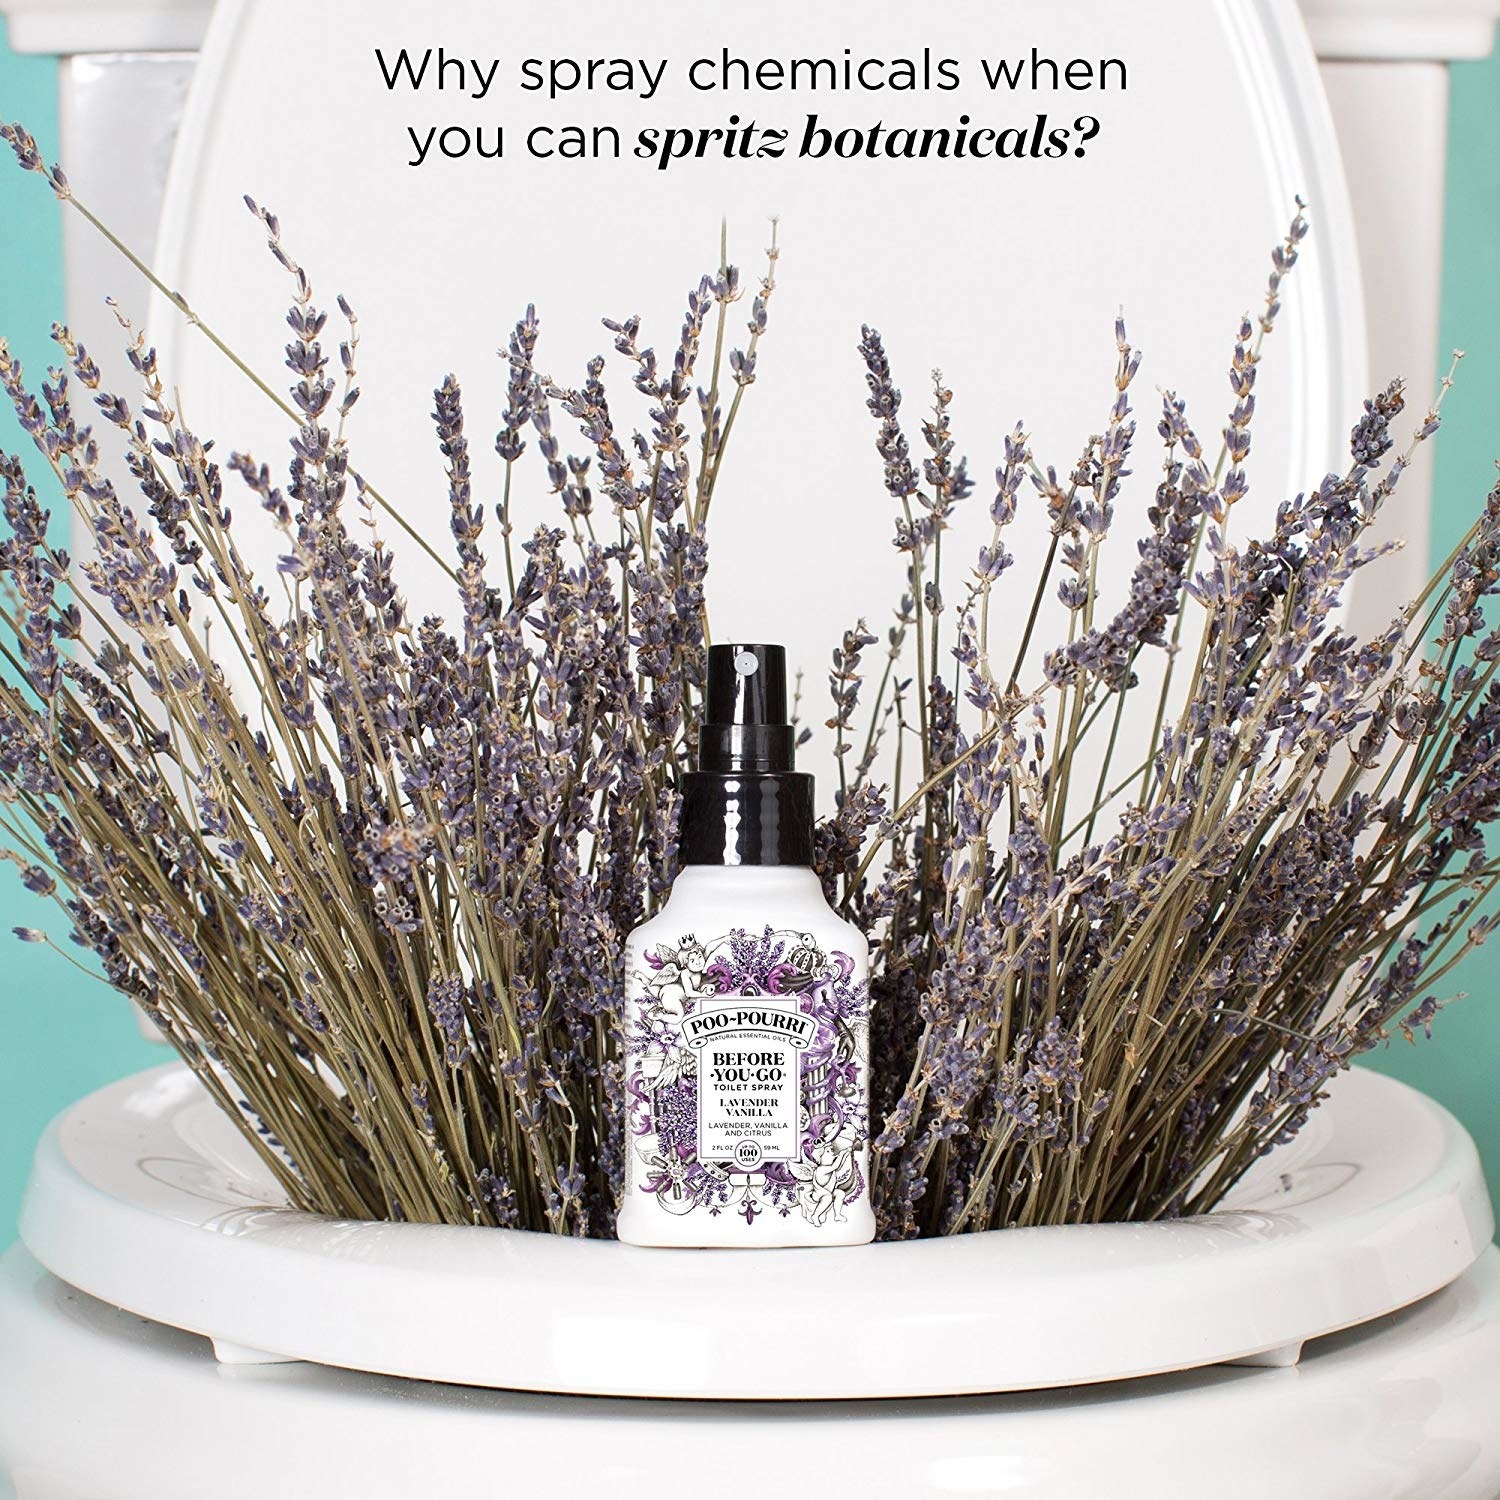 bottle of Poo-Pourri with bundle of lavender in a toilet bowl